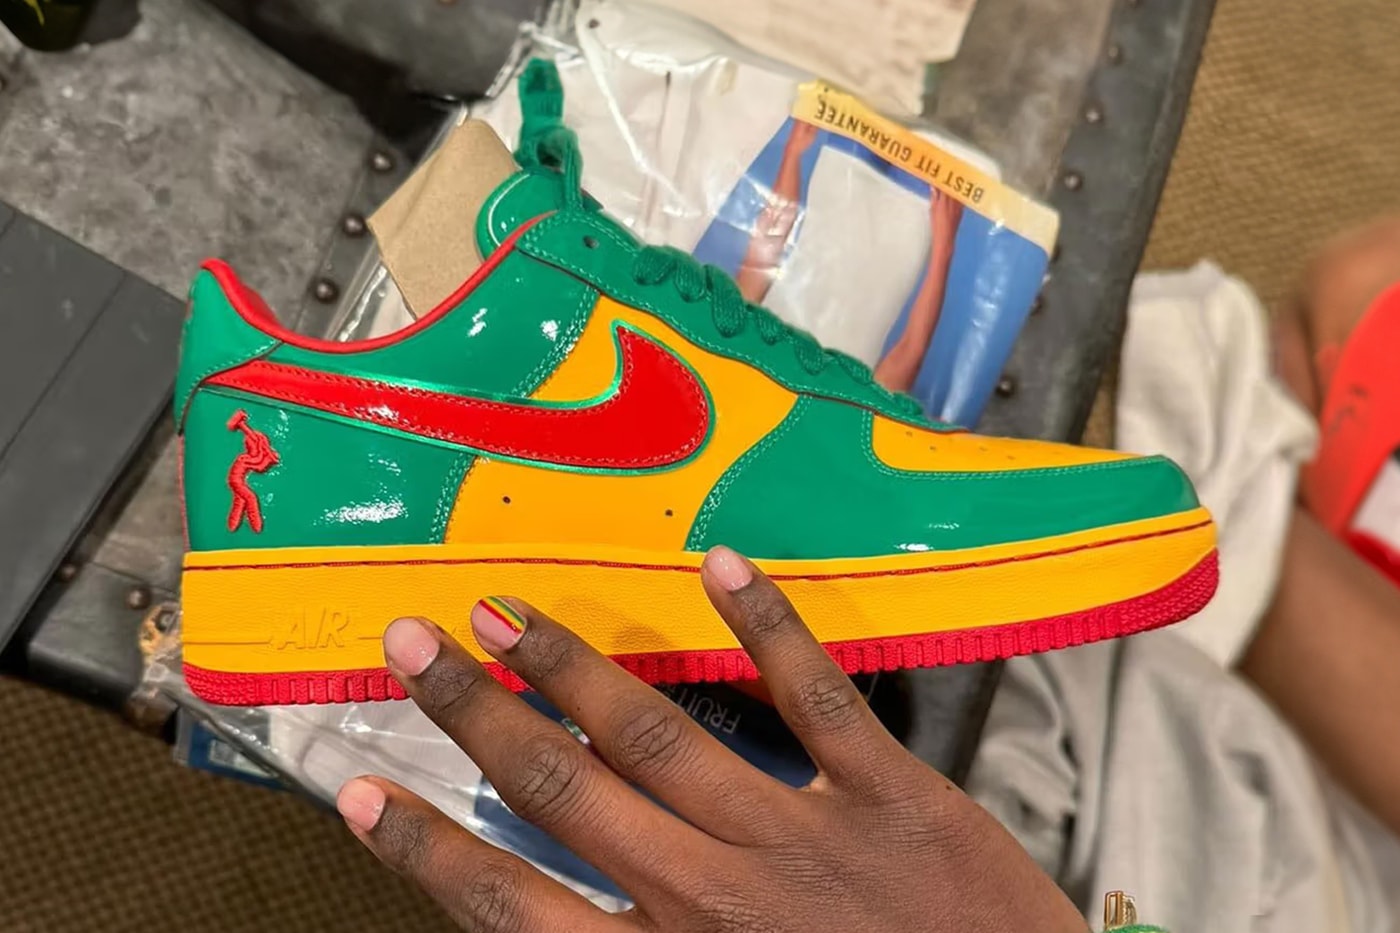 Lil Yachty Flexes New Air Force 1 Sneaker at Coachella air force one nike 1 drop concrete boys family exclusive limited edition release price boat performance weekend 1 doja cat lana del rey images info drop snkrs